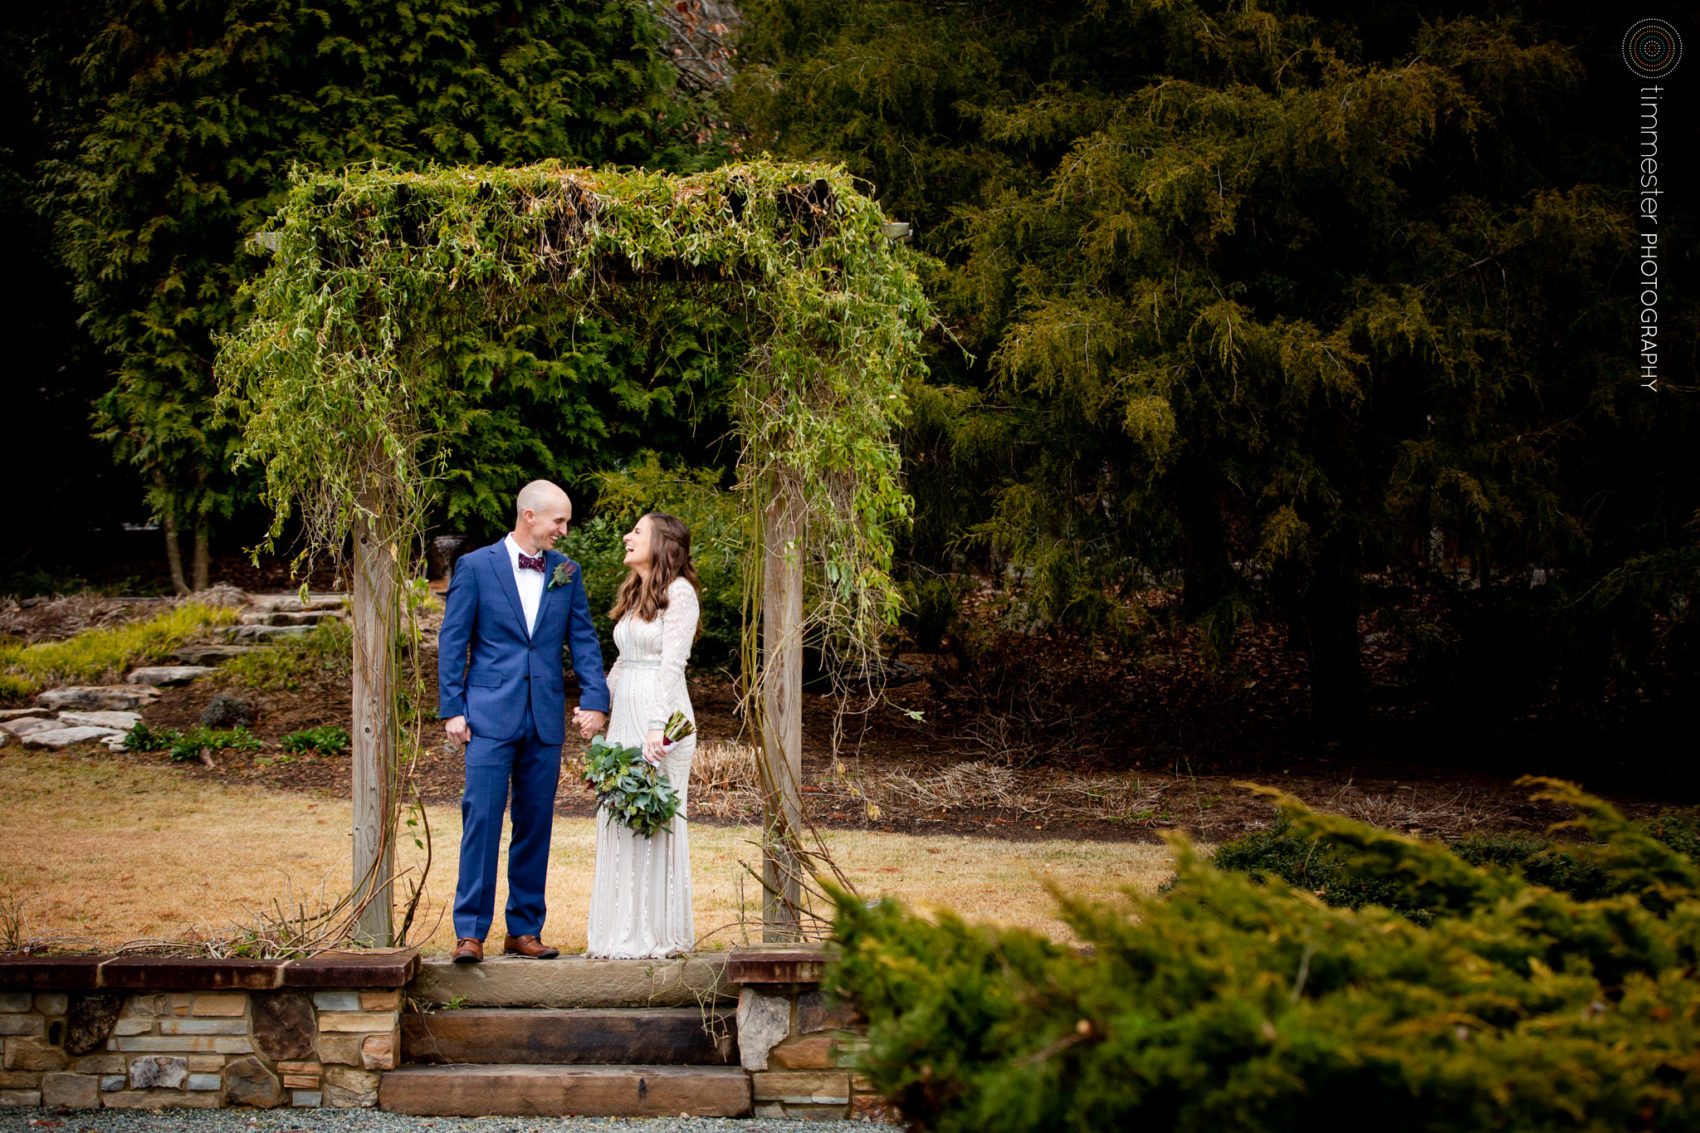 A winter wedding at Chapel Hill Carriage House